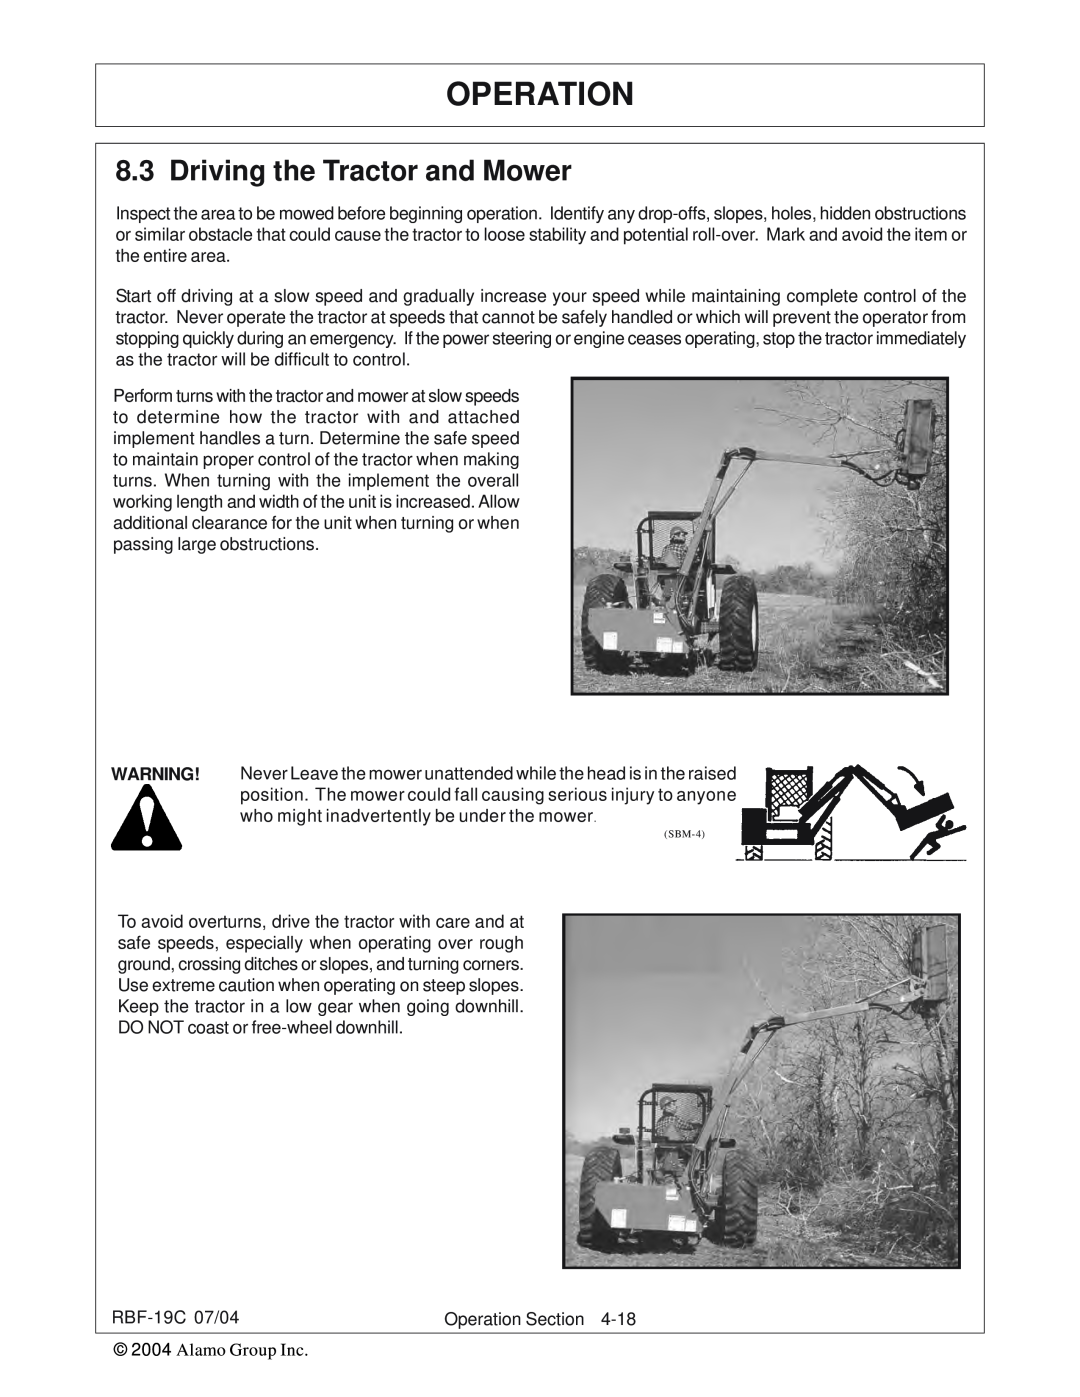 Tiger RBF-19C manual Driving the Tractor and Mower, Operation 